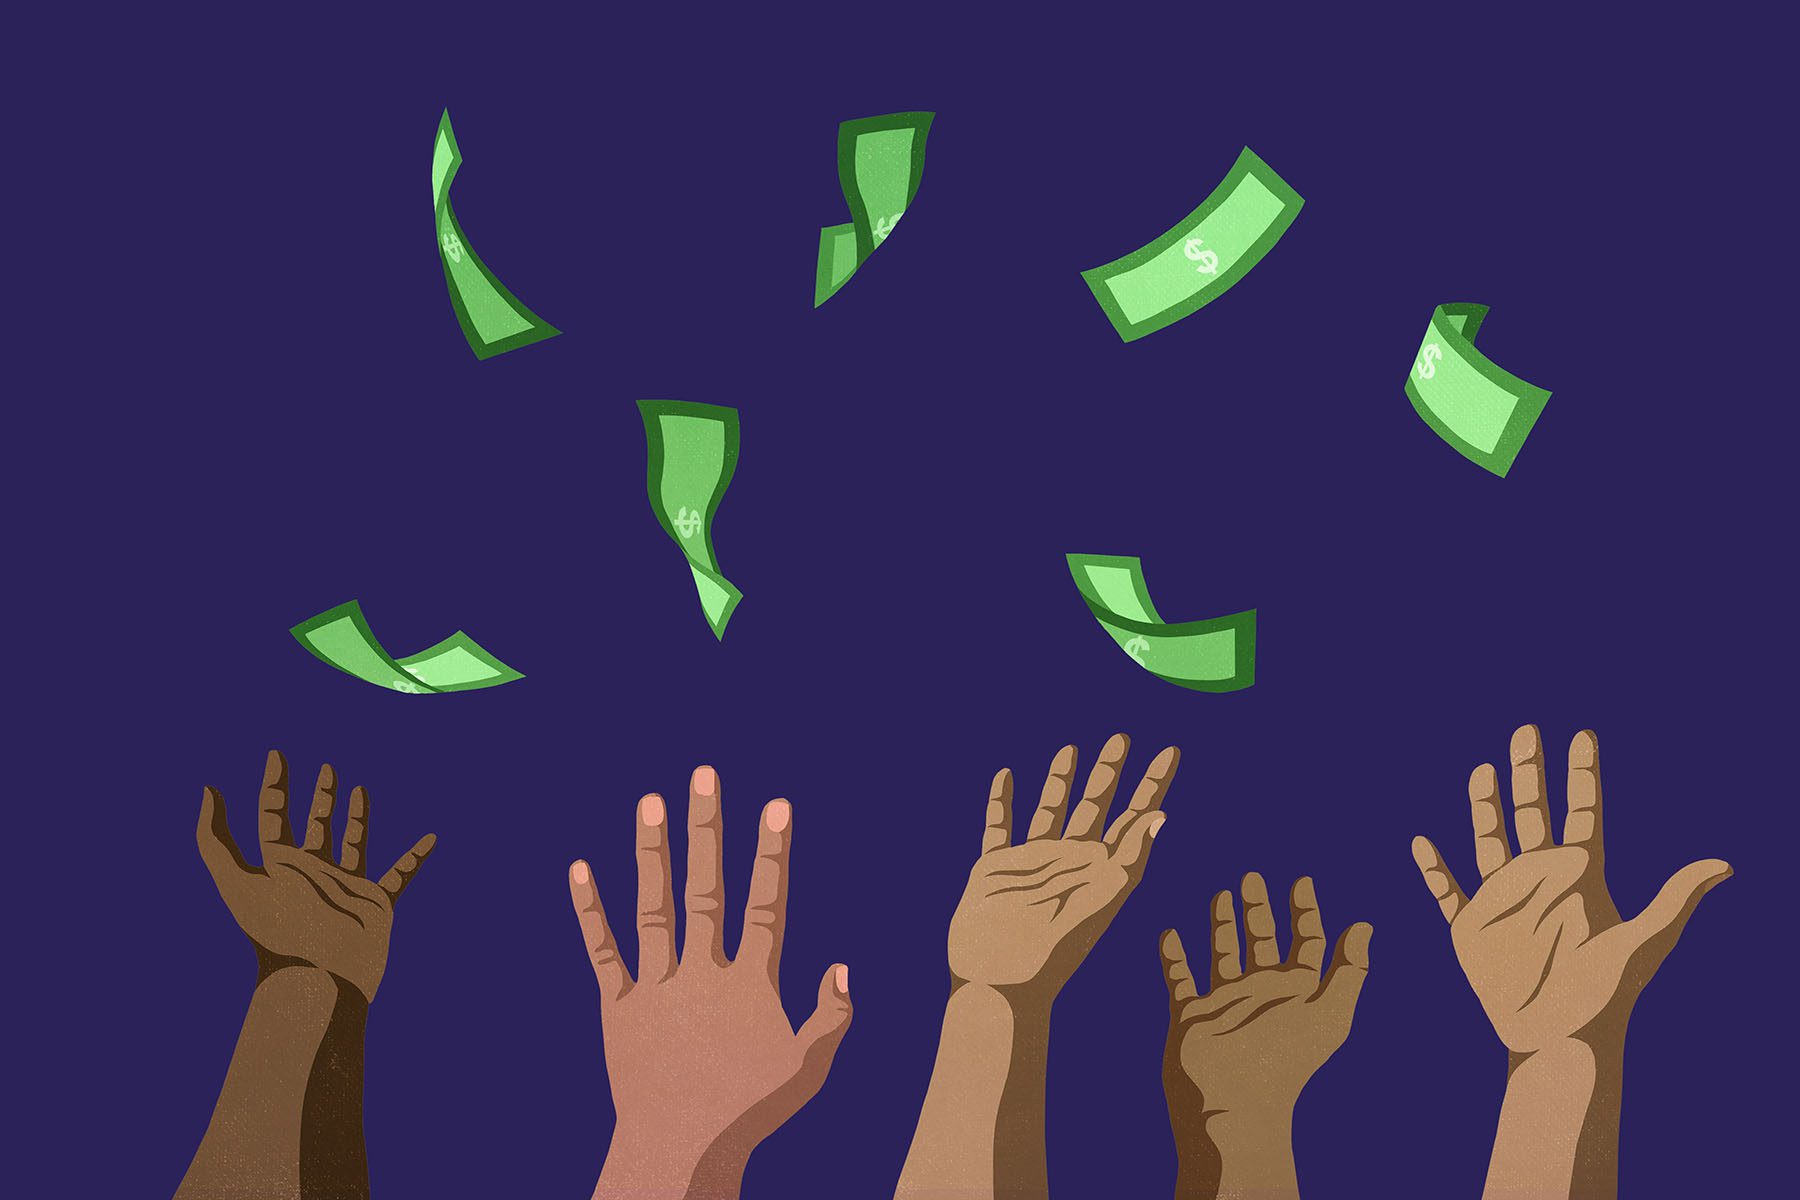 Illustration of hands reaching for falling money.